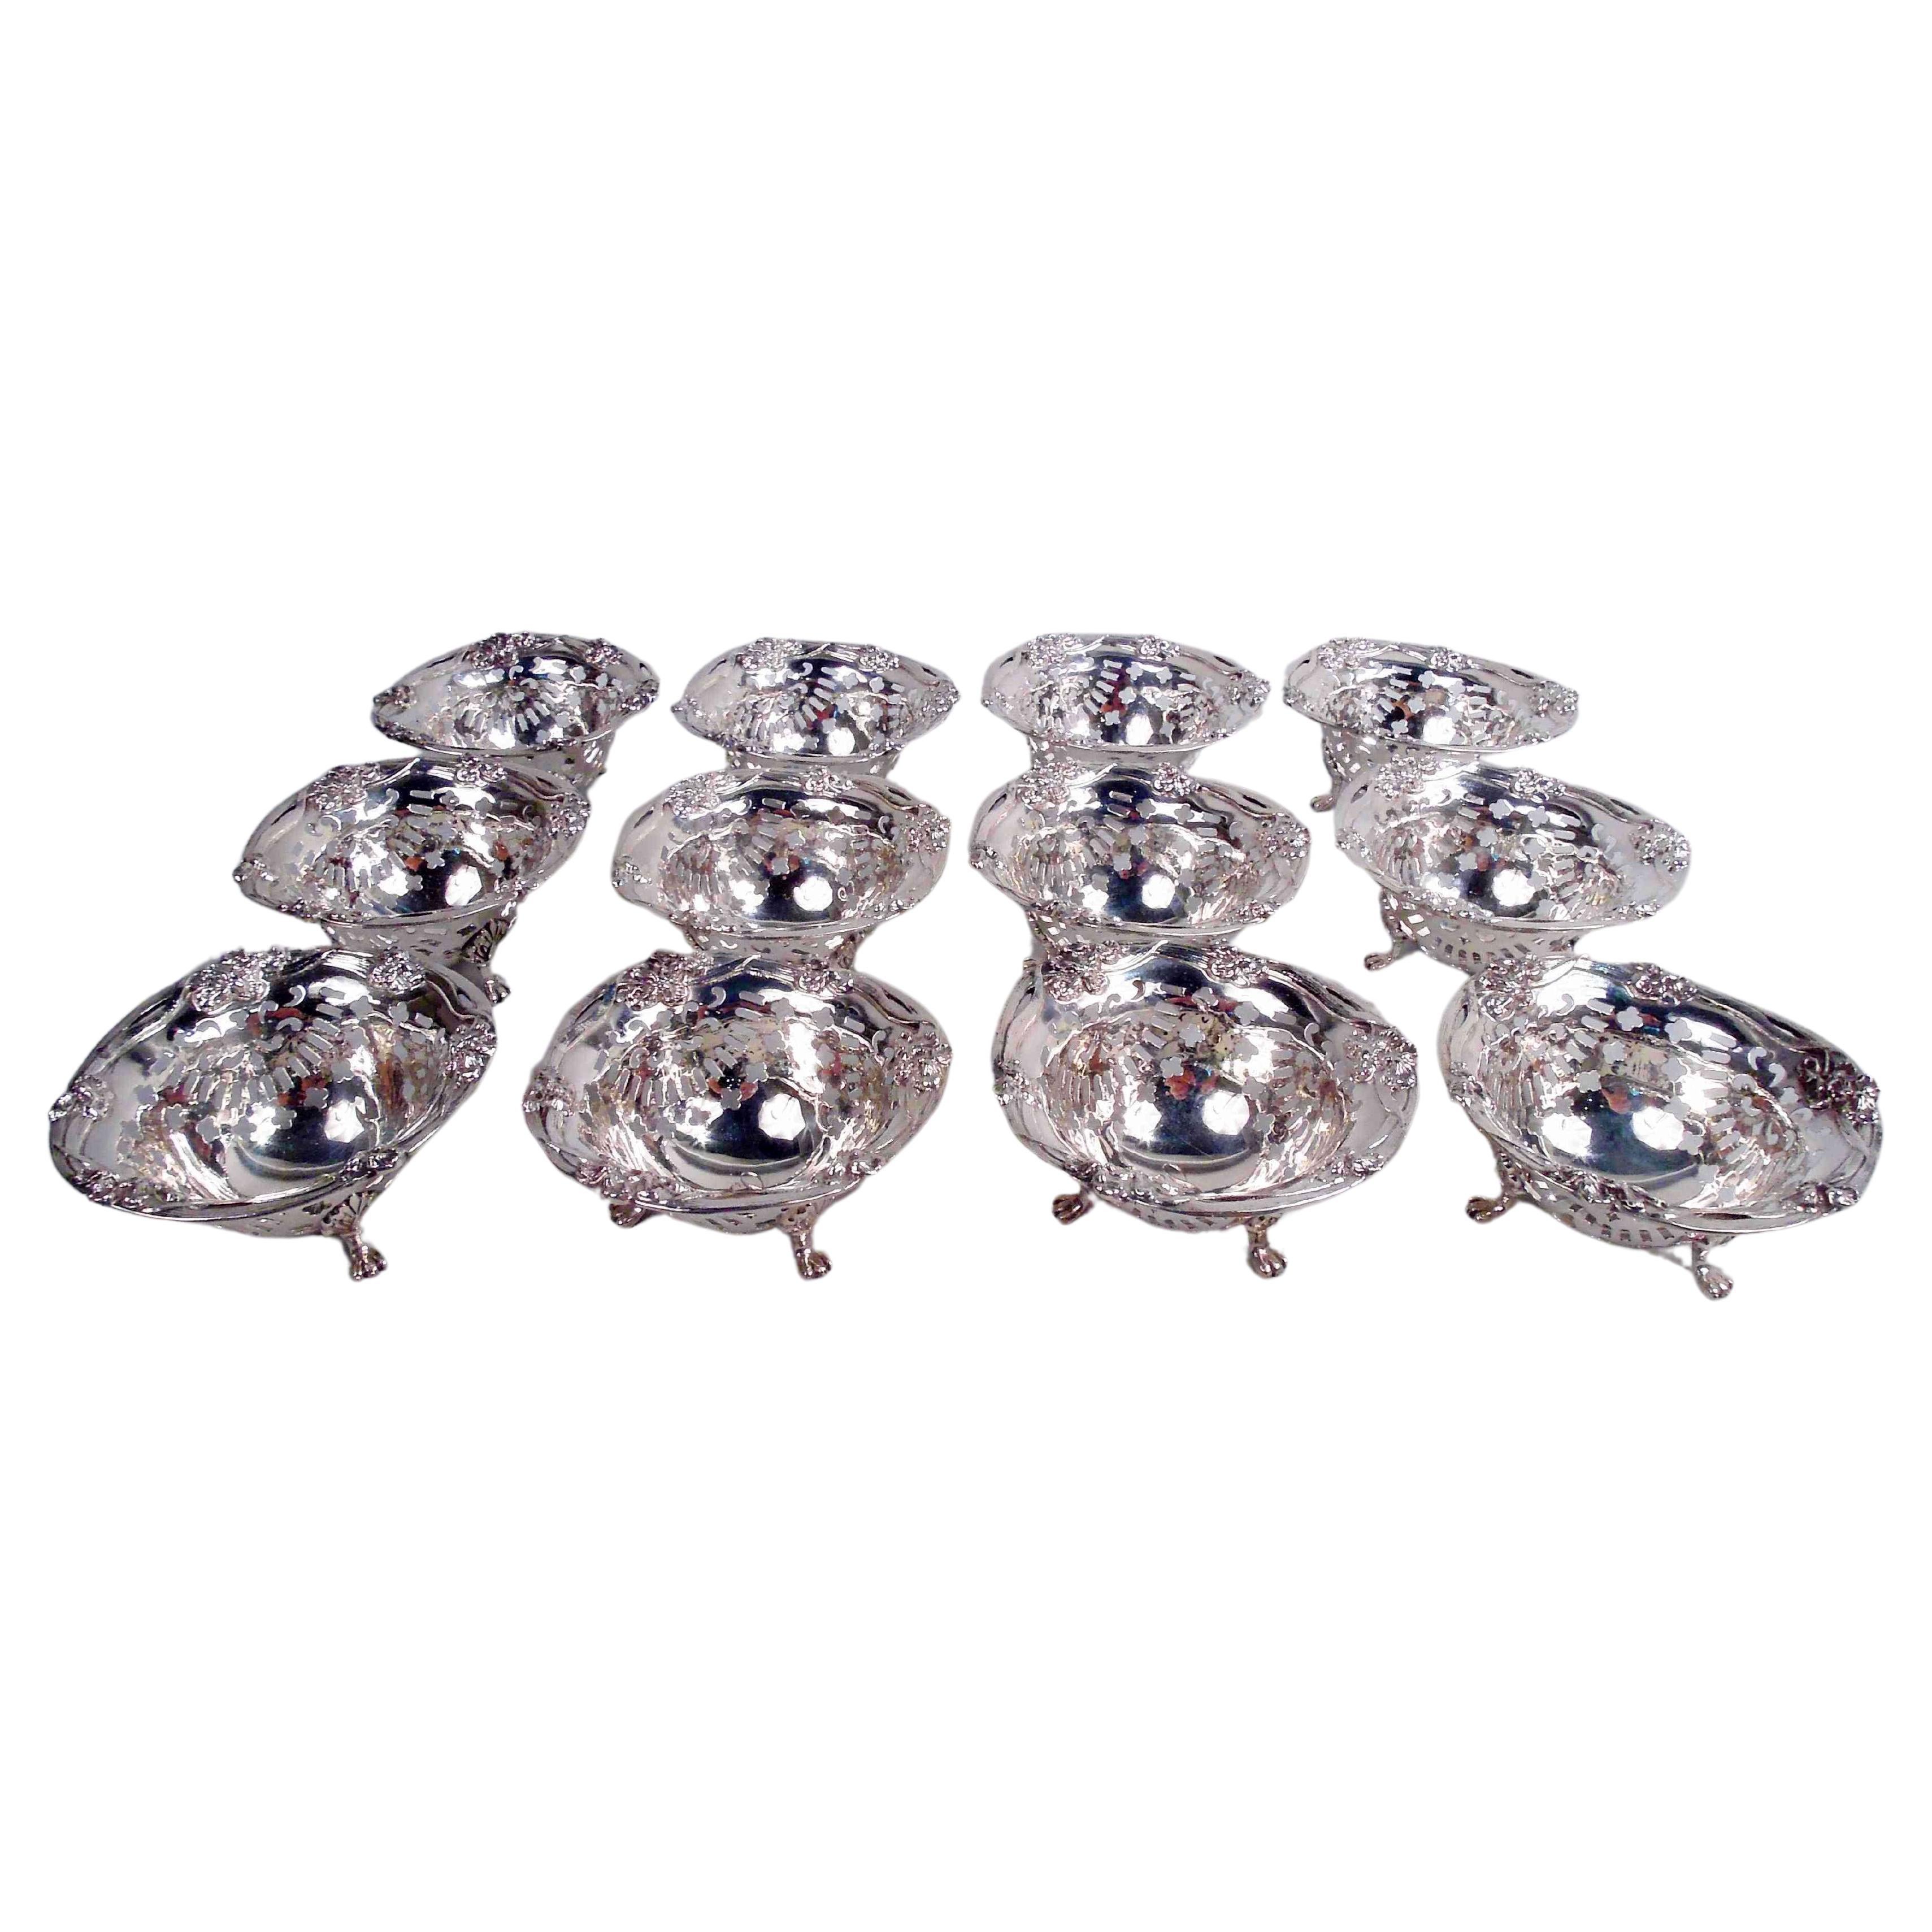 Set of 12 American Art Nouveau Sterling Silver Nut Dishes